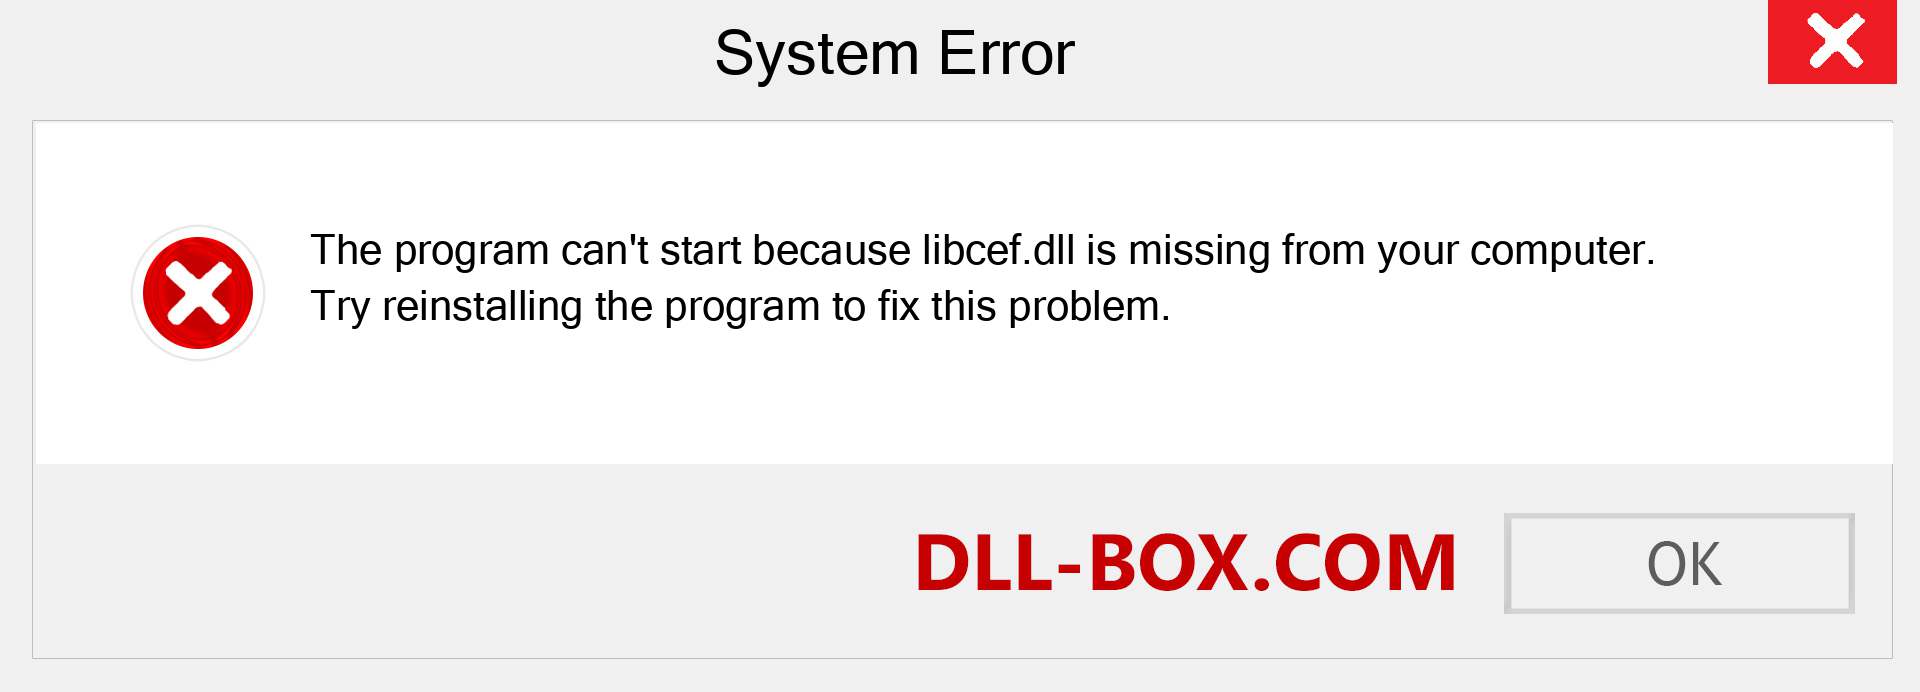  libcef.dll file is missing?. Download for Windows 7, 8, 10 - Fix  libcef dll Missing Error on Windows, photos, images